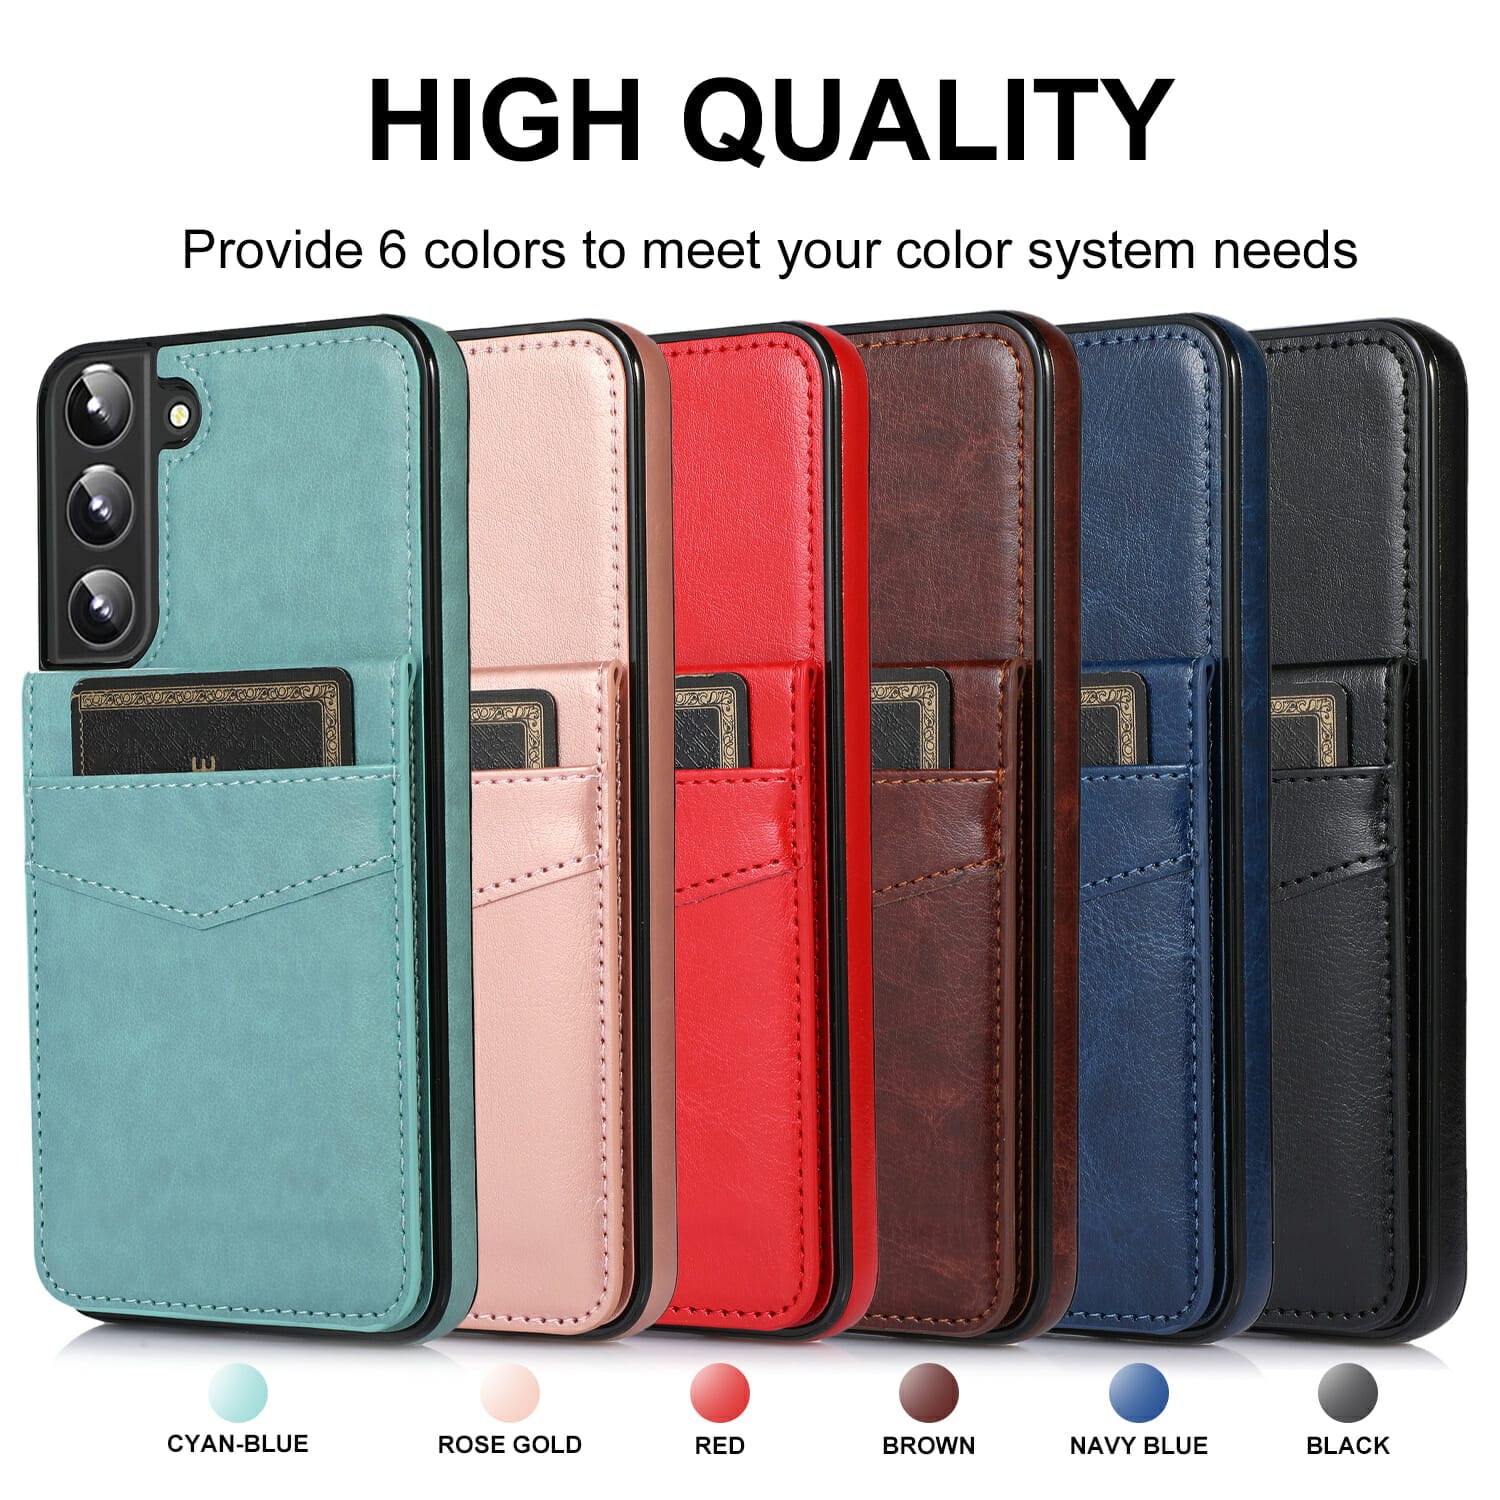 Luxury Leather Wallet Case For Samsung Galaxy S Series Note Series and A Series Phone 5